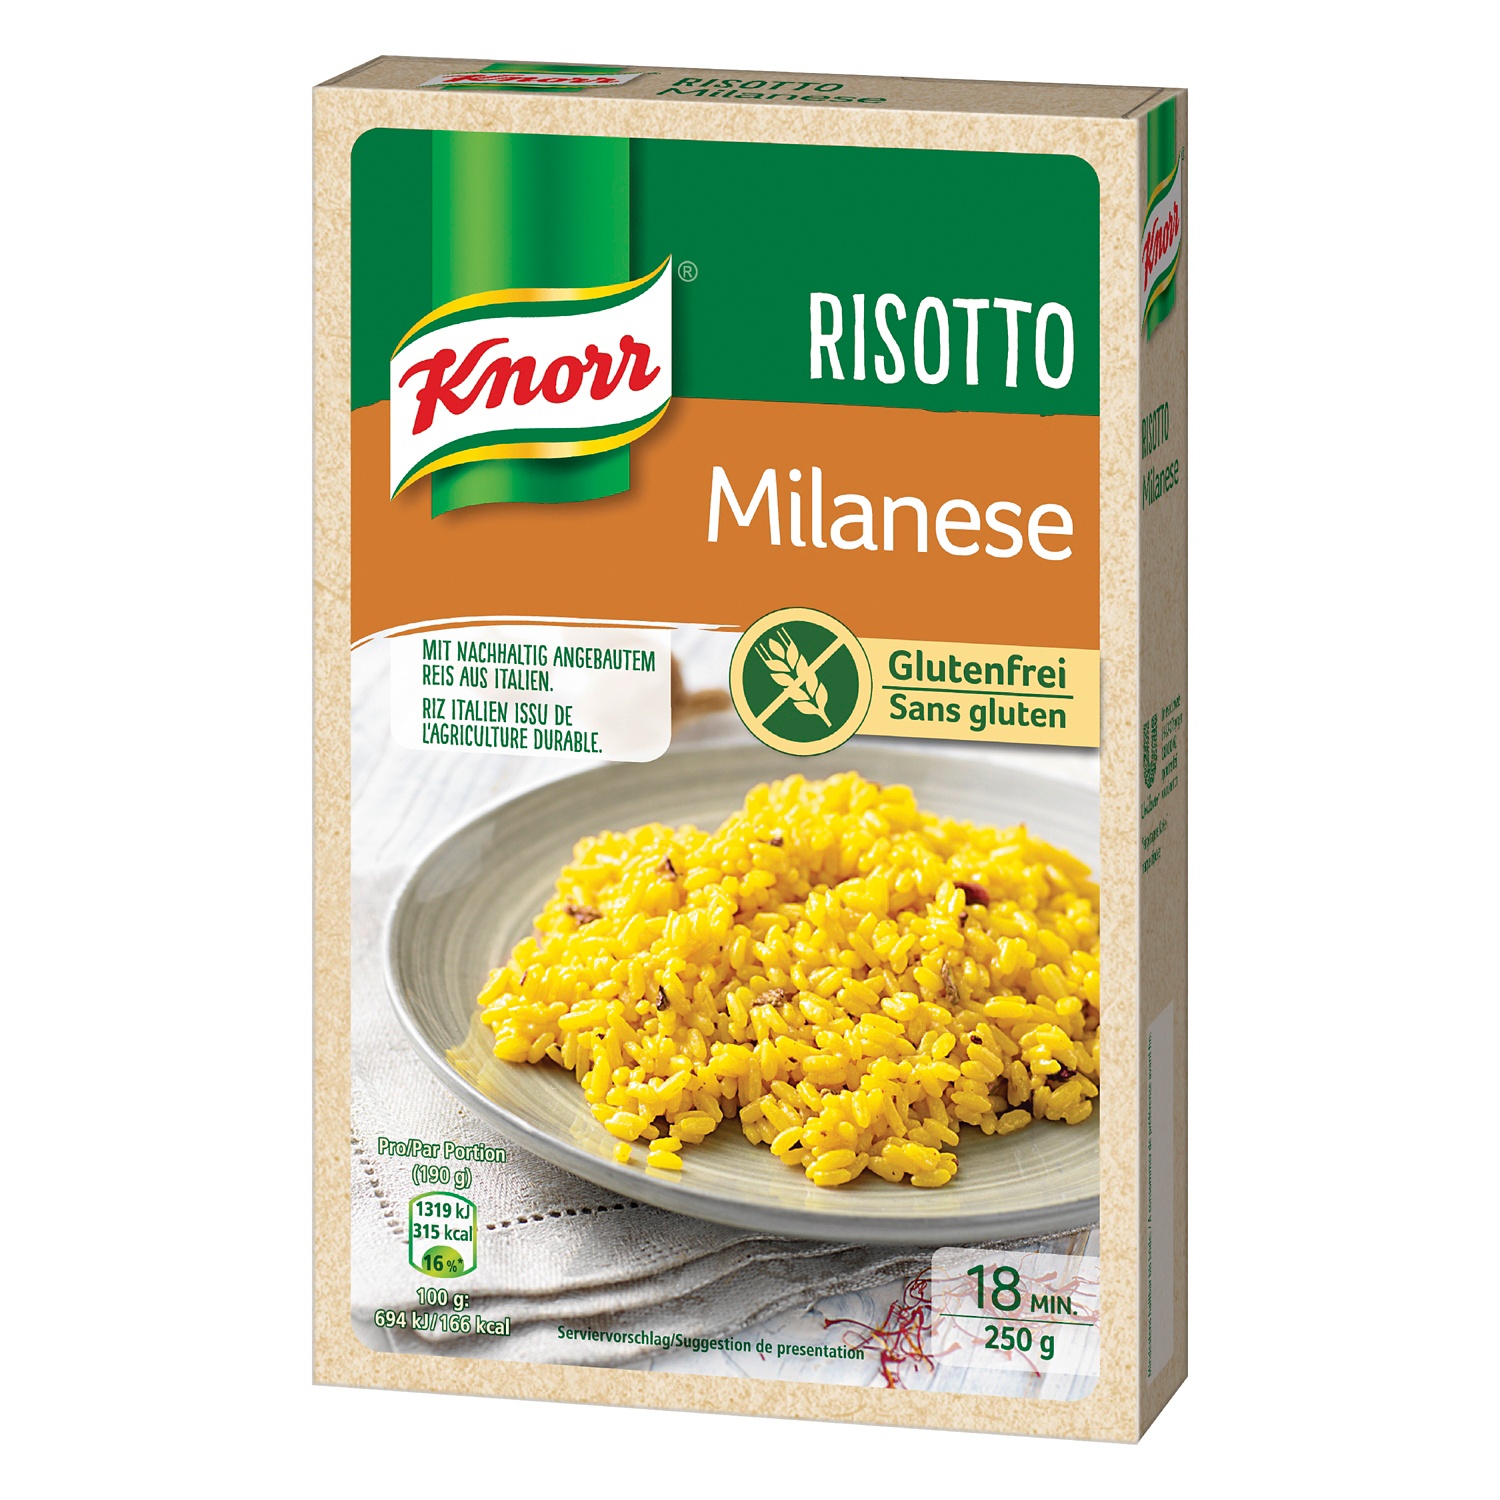 KNORR® Risotto, Milanese